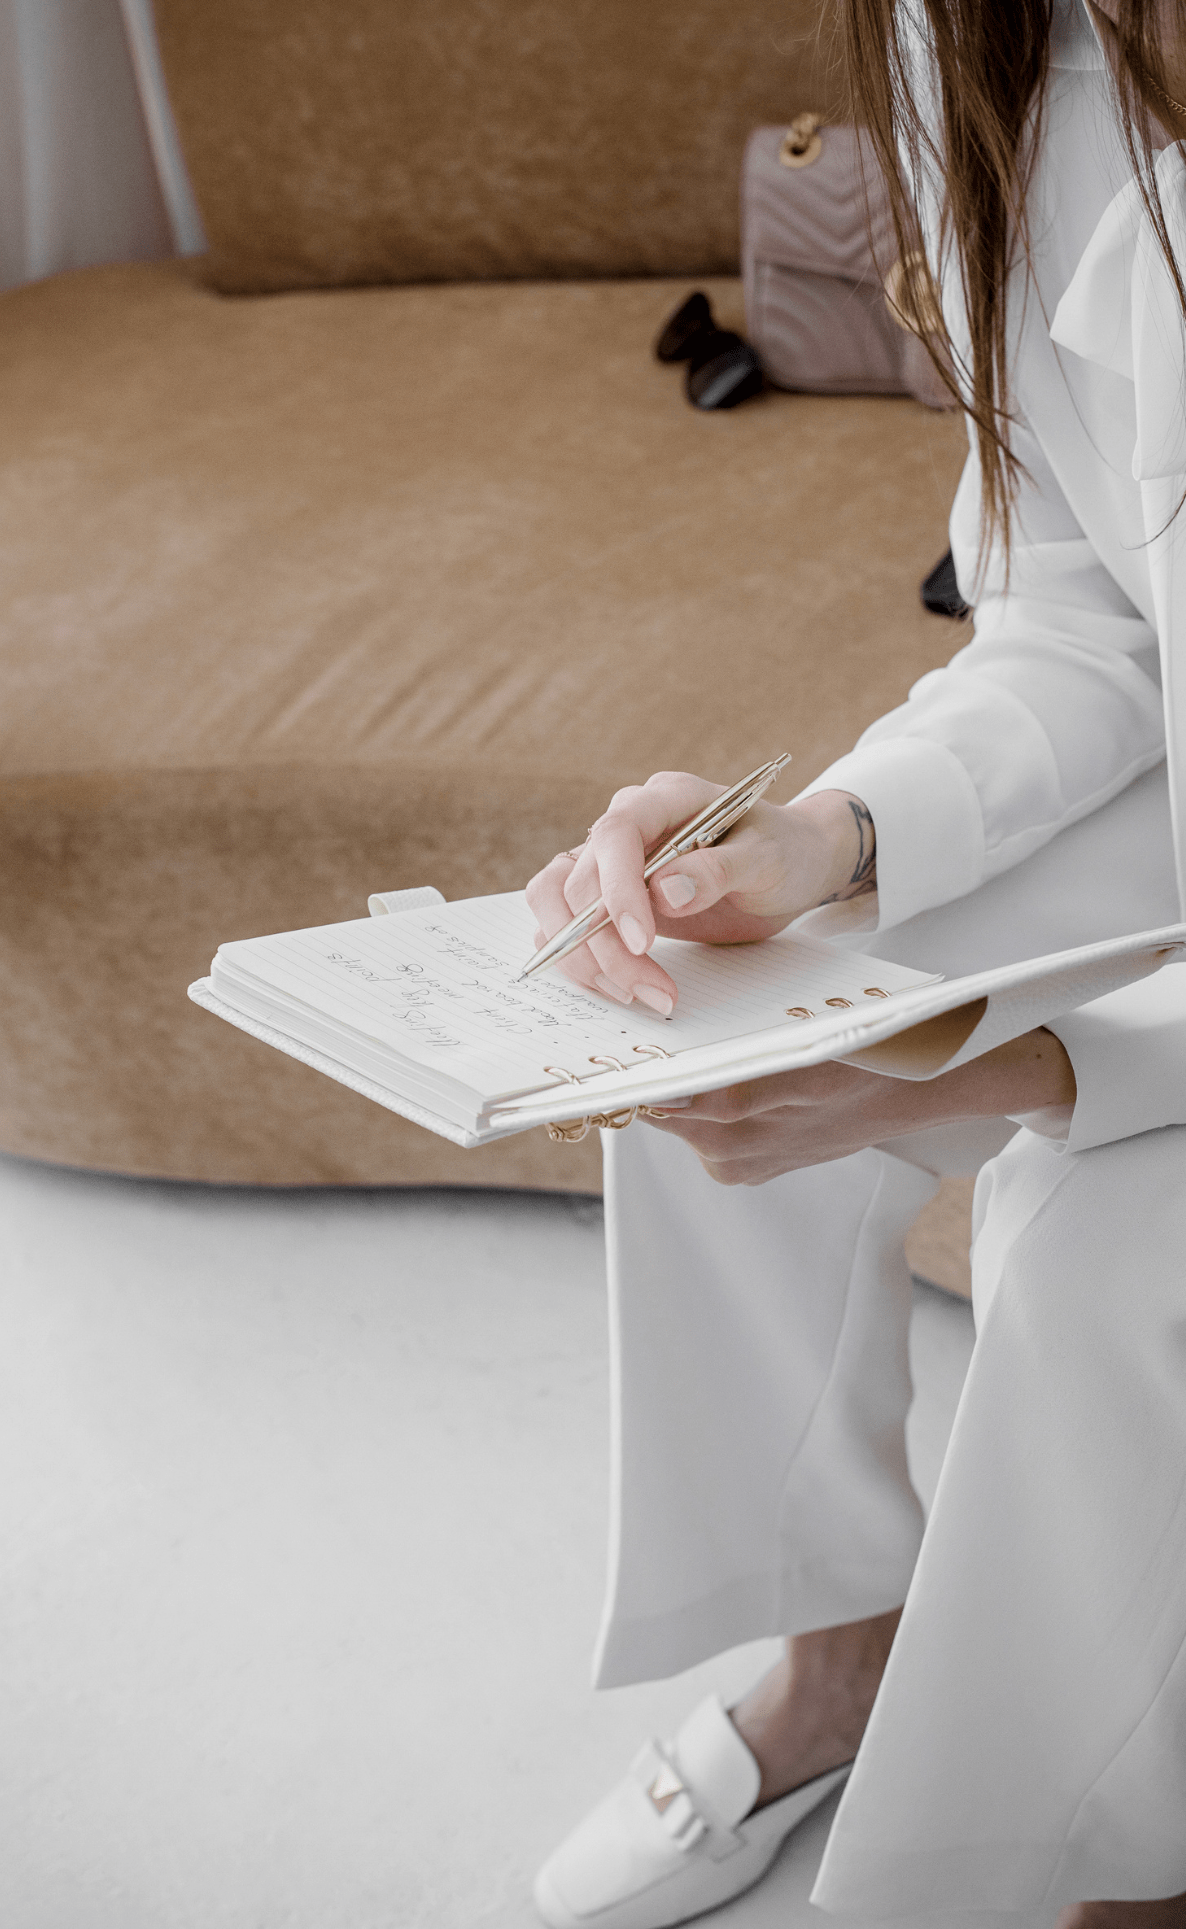 women in white suit sitting on a tax couch with a pink handbag next to her, writing in a white planner